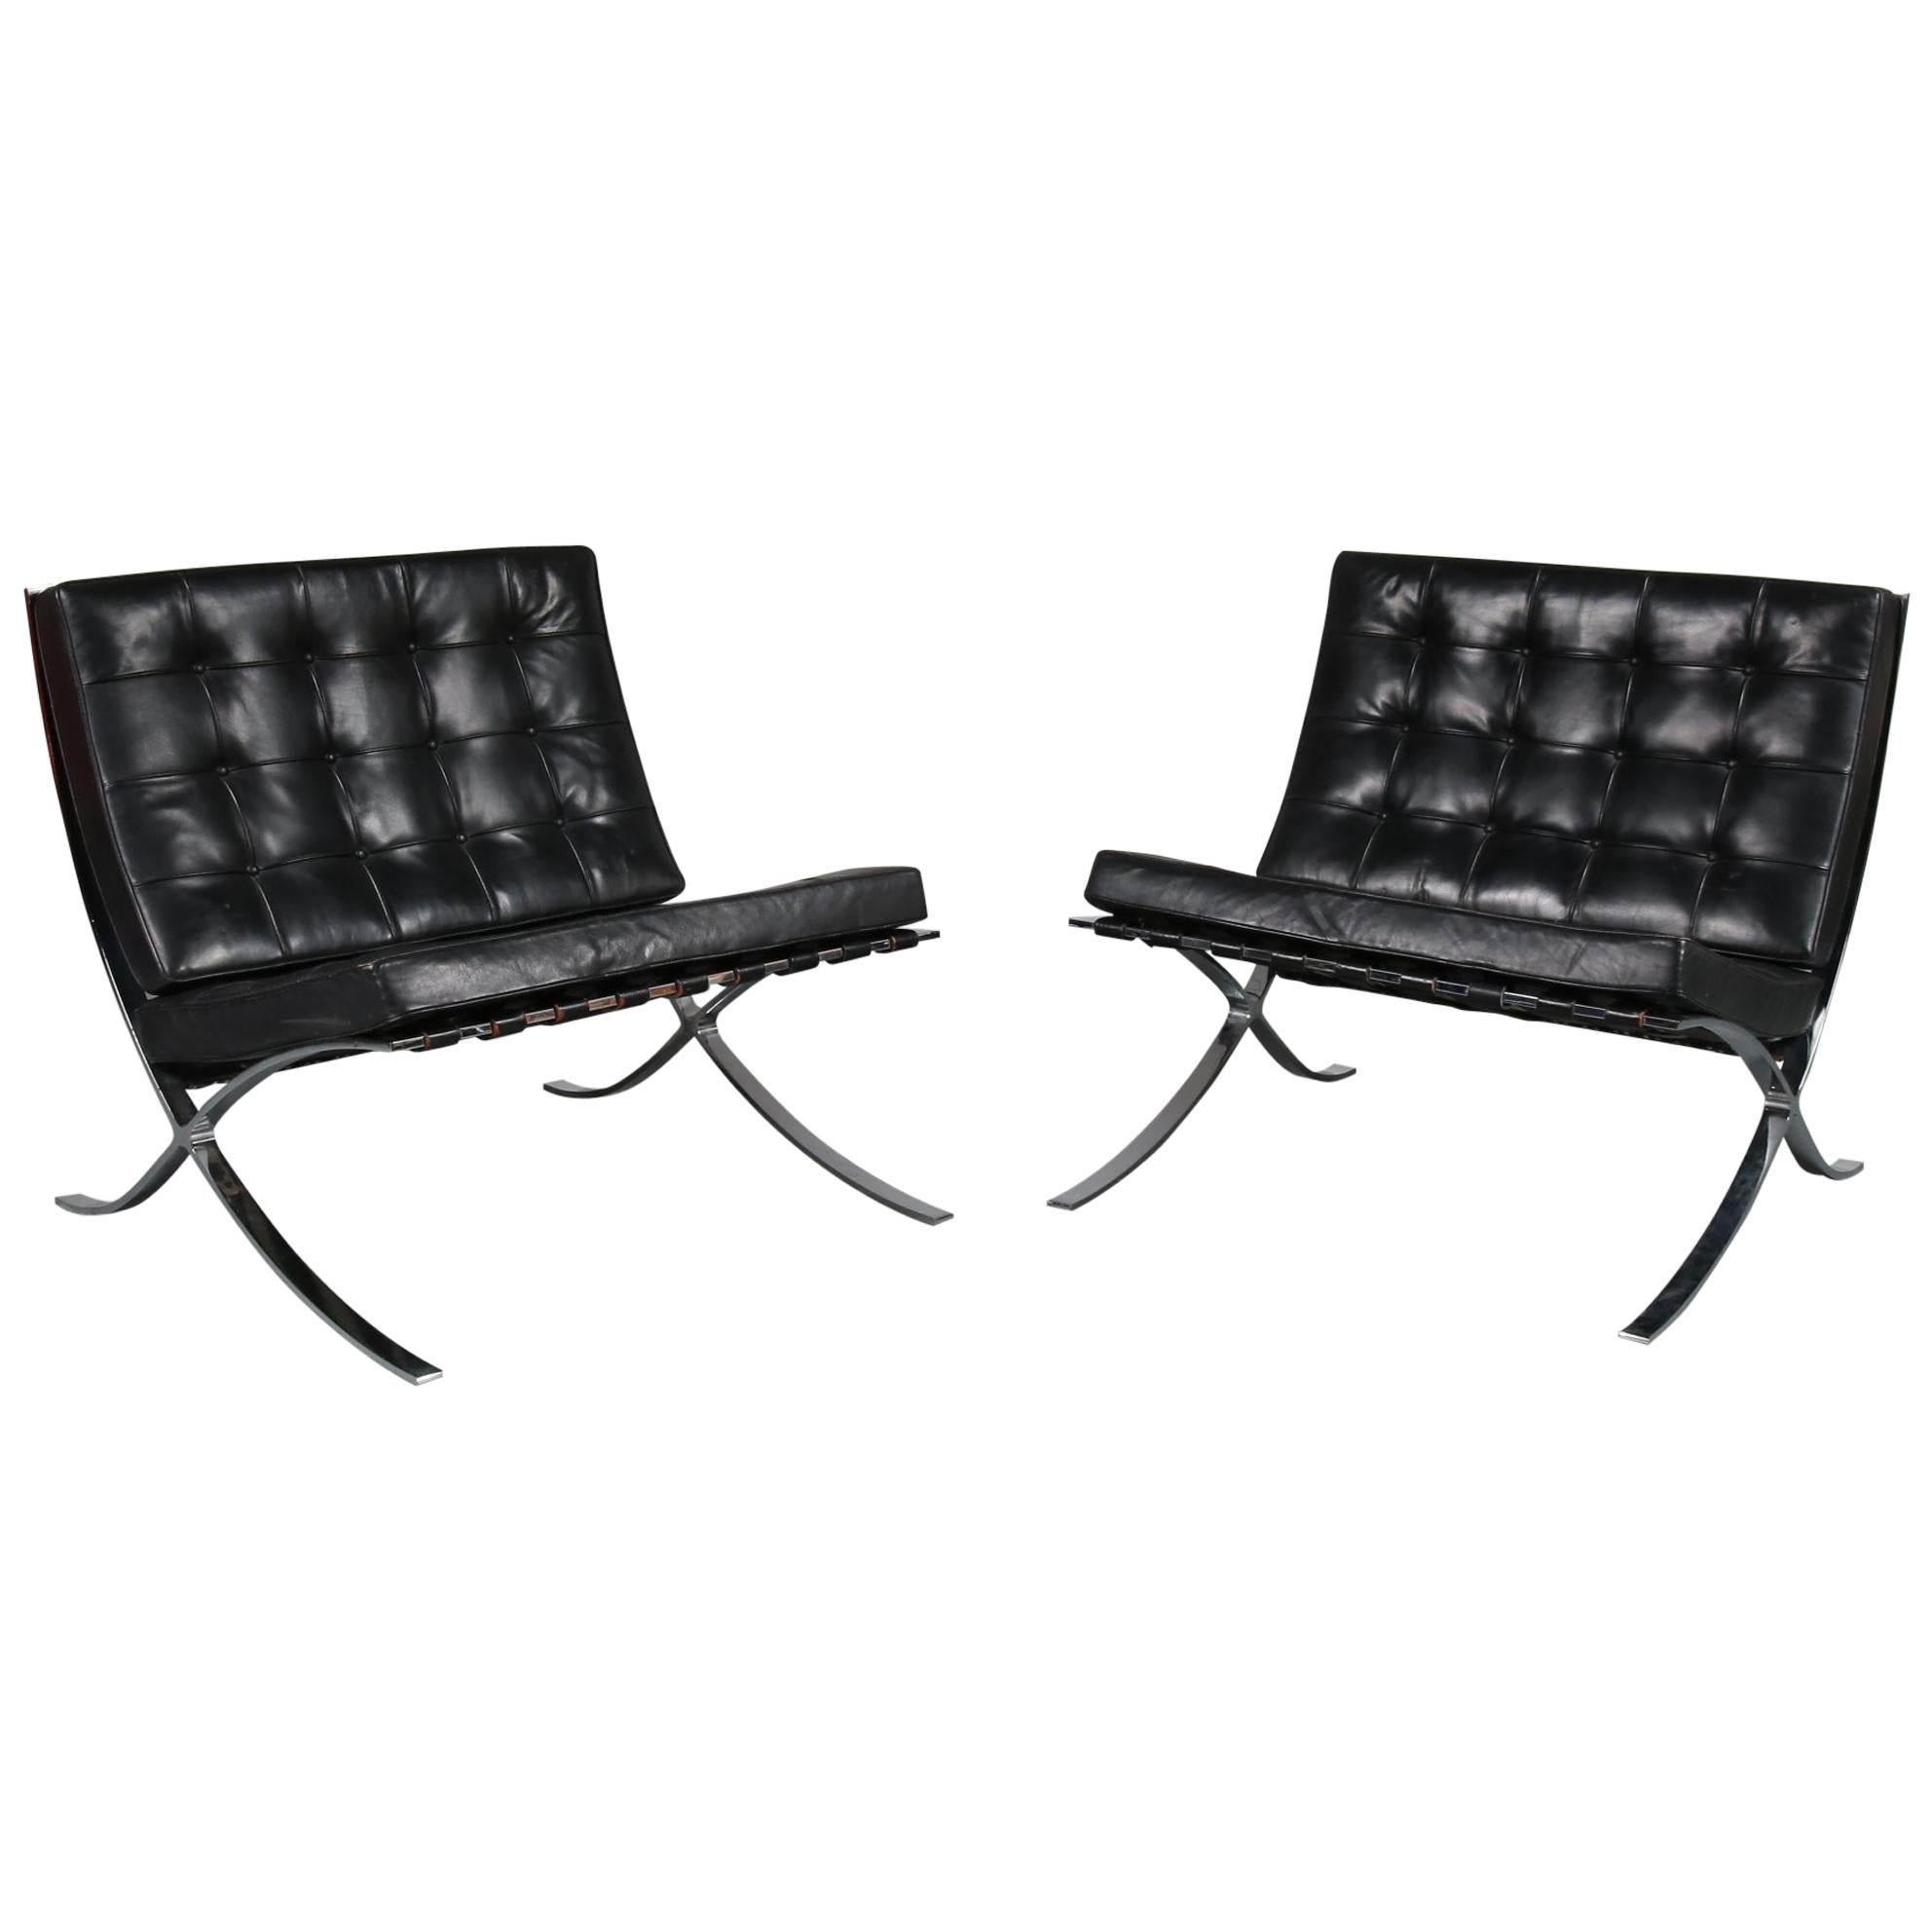 Pair of Barcelona Chairs by Mies Van Der Rohe for Knoll International, USA 1970